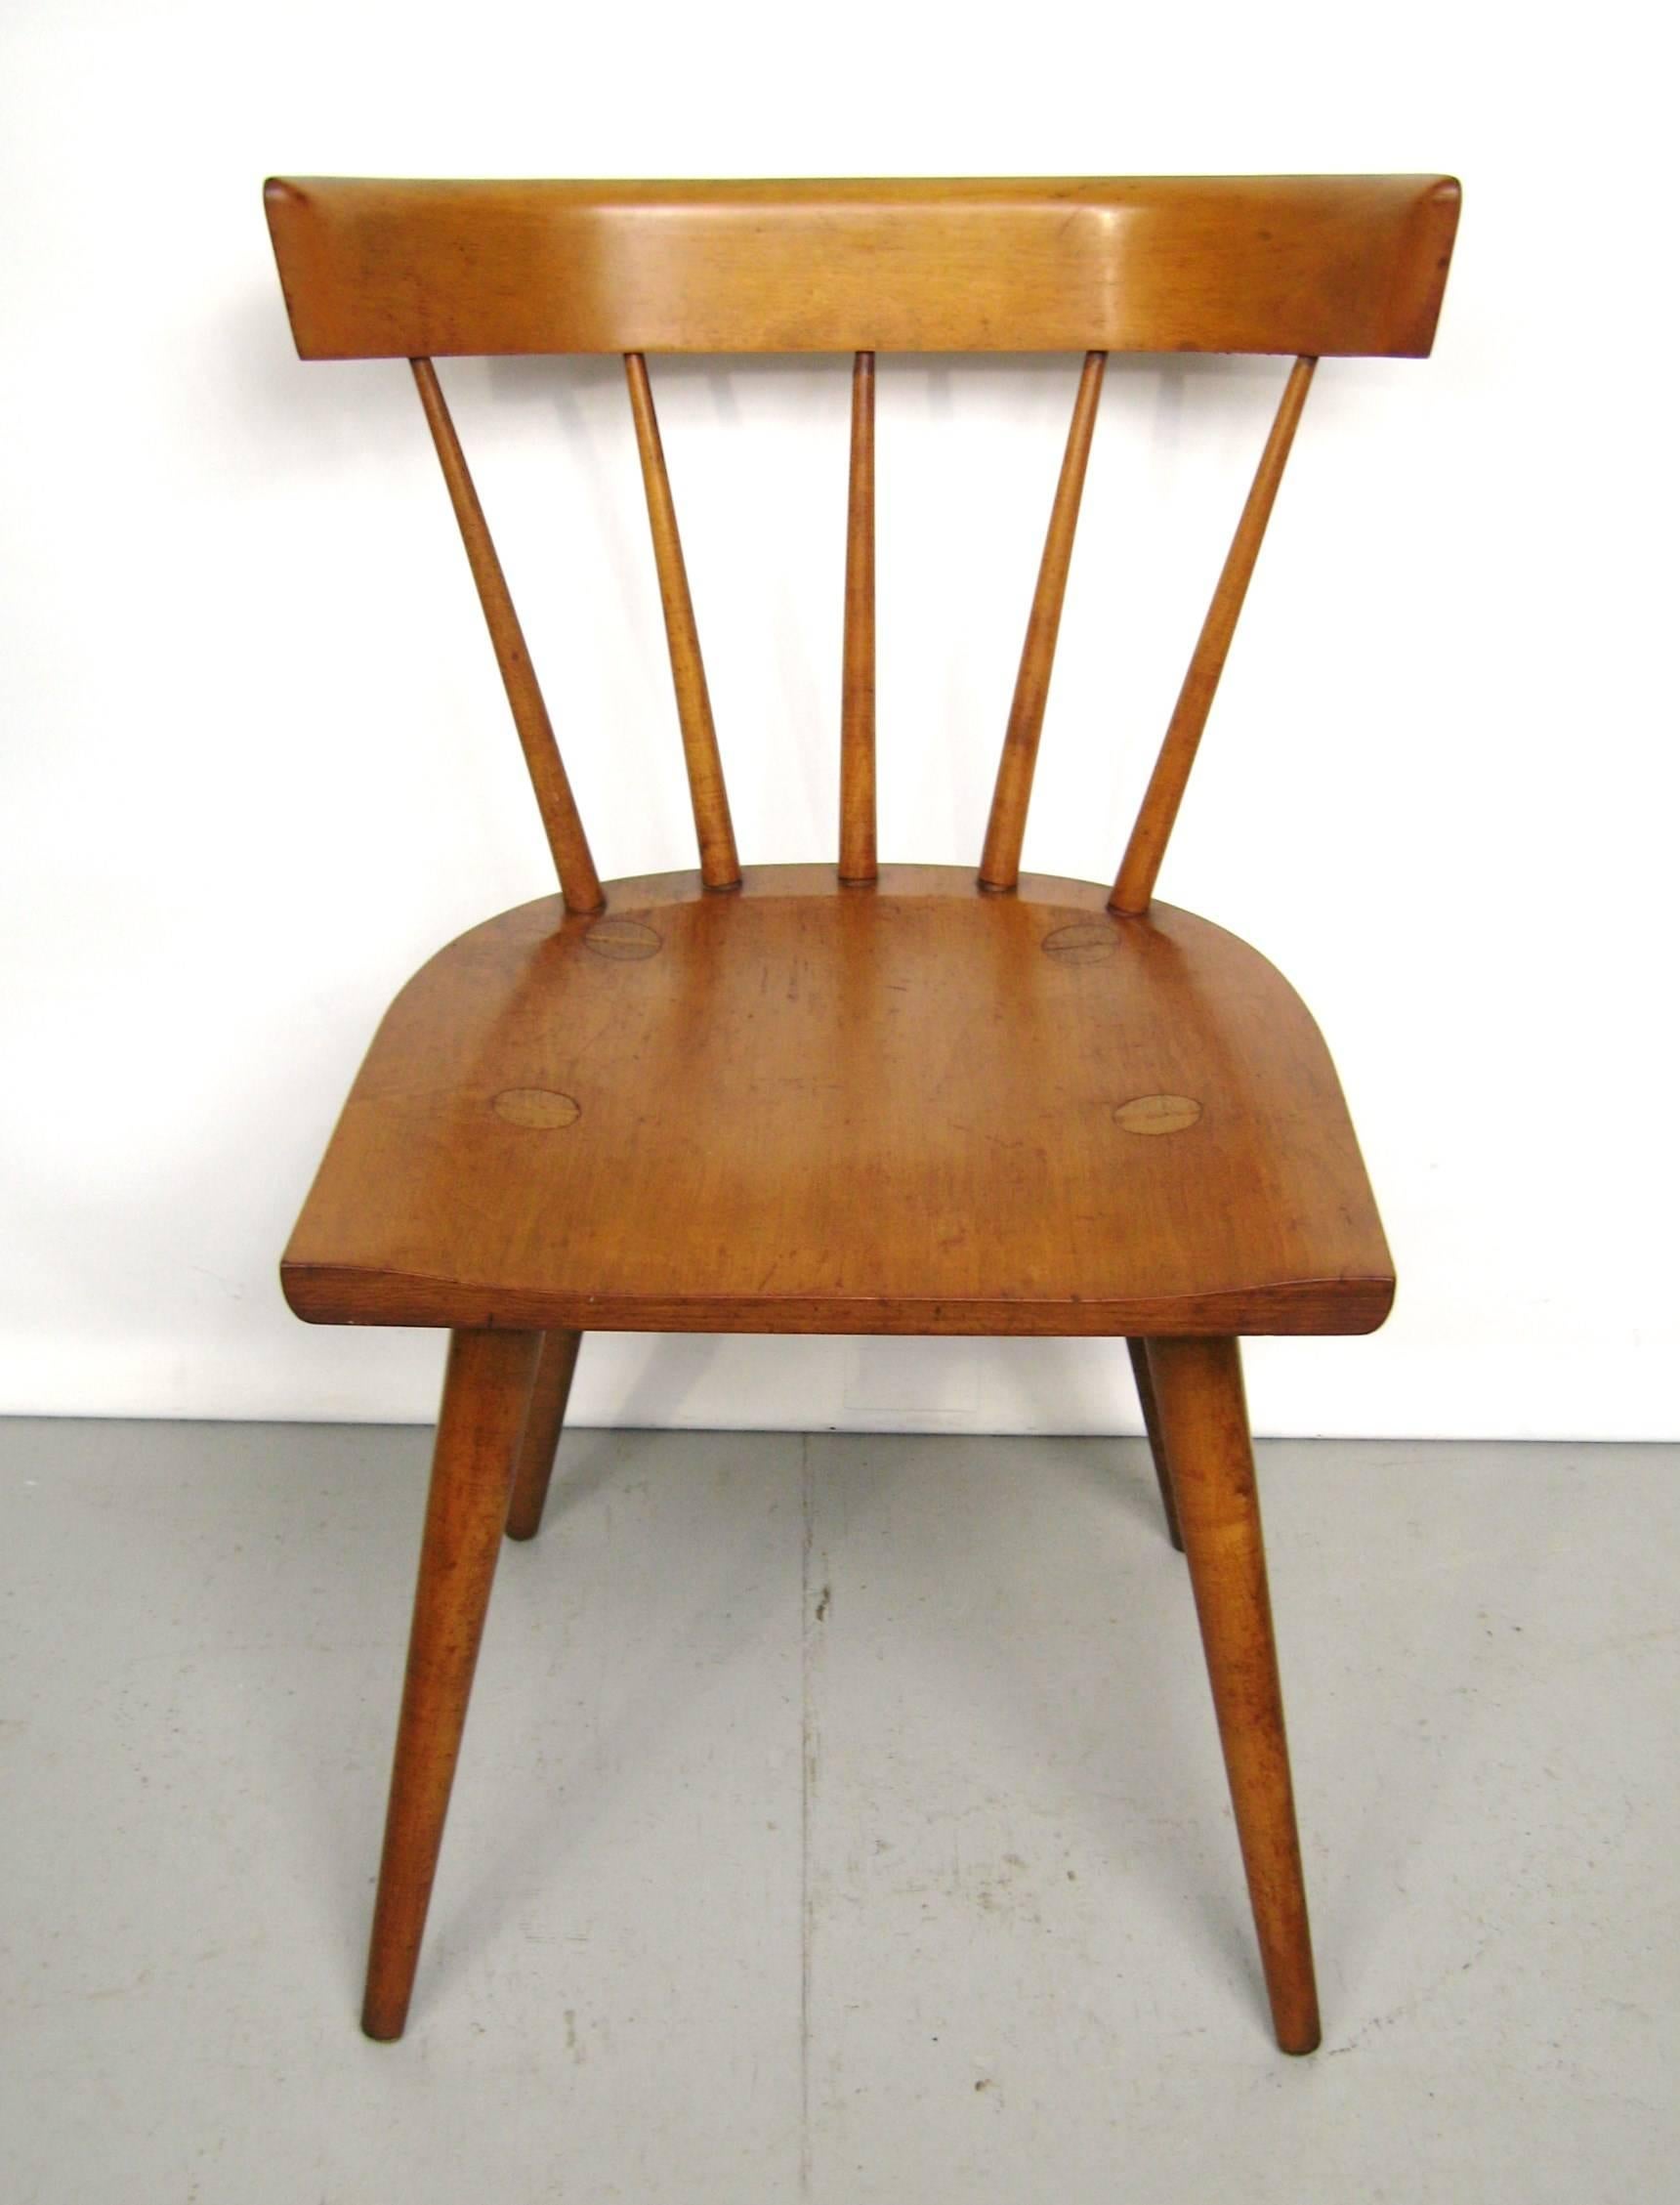 Maple Paul McCobb dining chair or desk chair, Planner Group.In wonderful vintage condition. Measuring: H 30 in    W 17 in   D 19 in  Seat height 17 in. Please be sure to check our storefront for more wonderful decorating pieces that range from